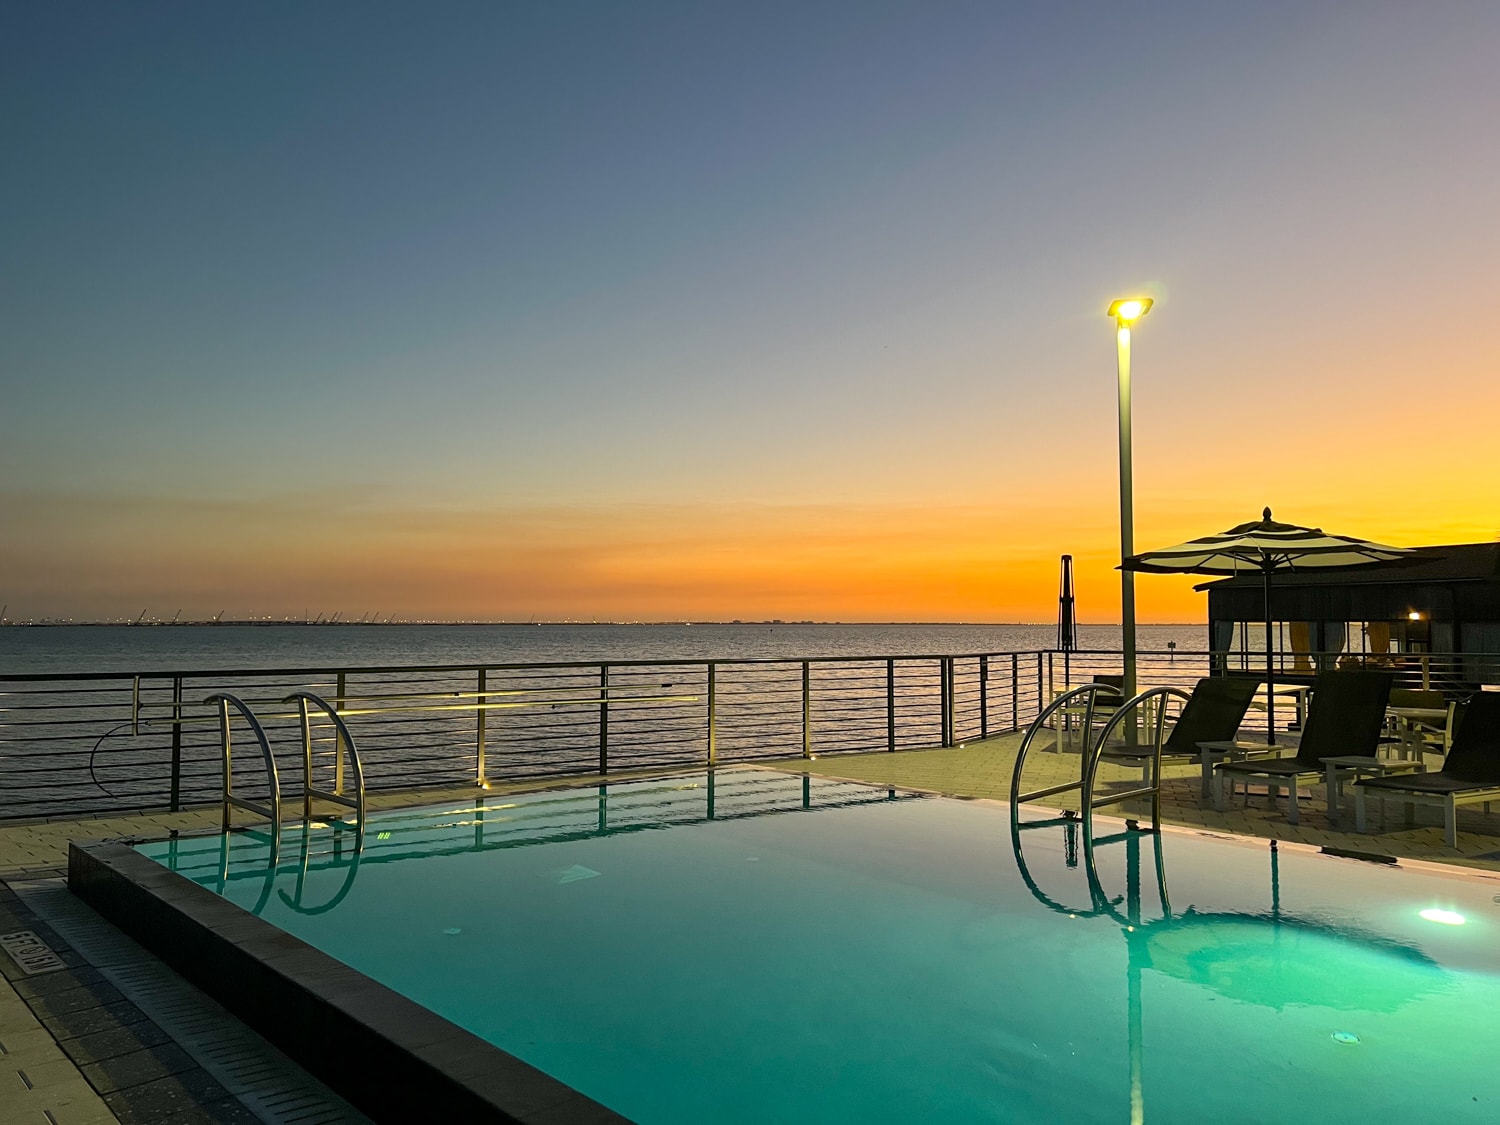 Sunset from the pool deck at The CURRENT Hotel in Tampa, Florida